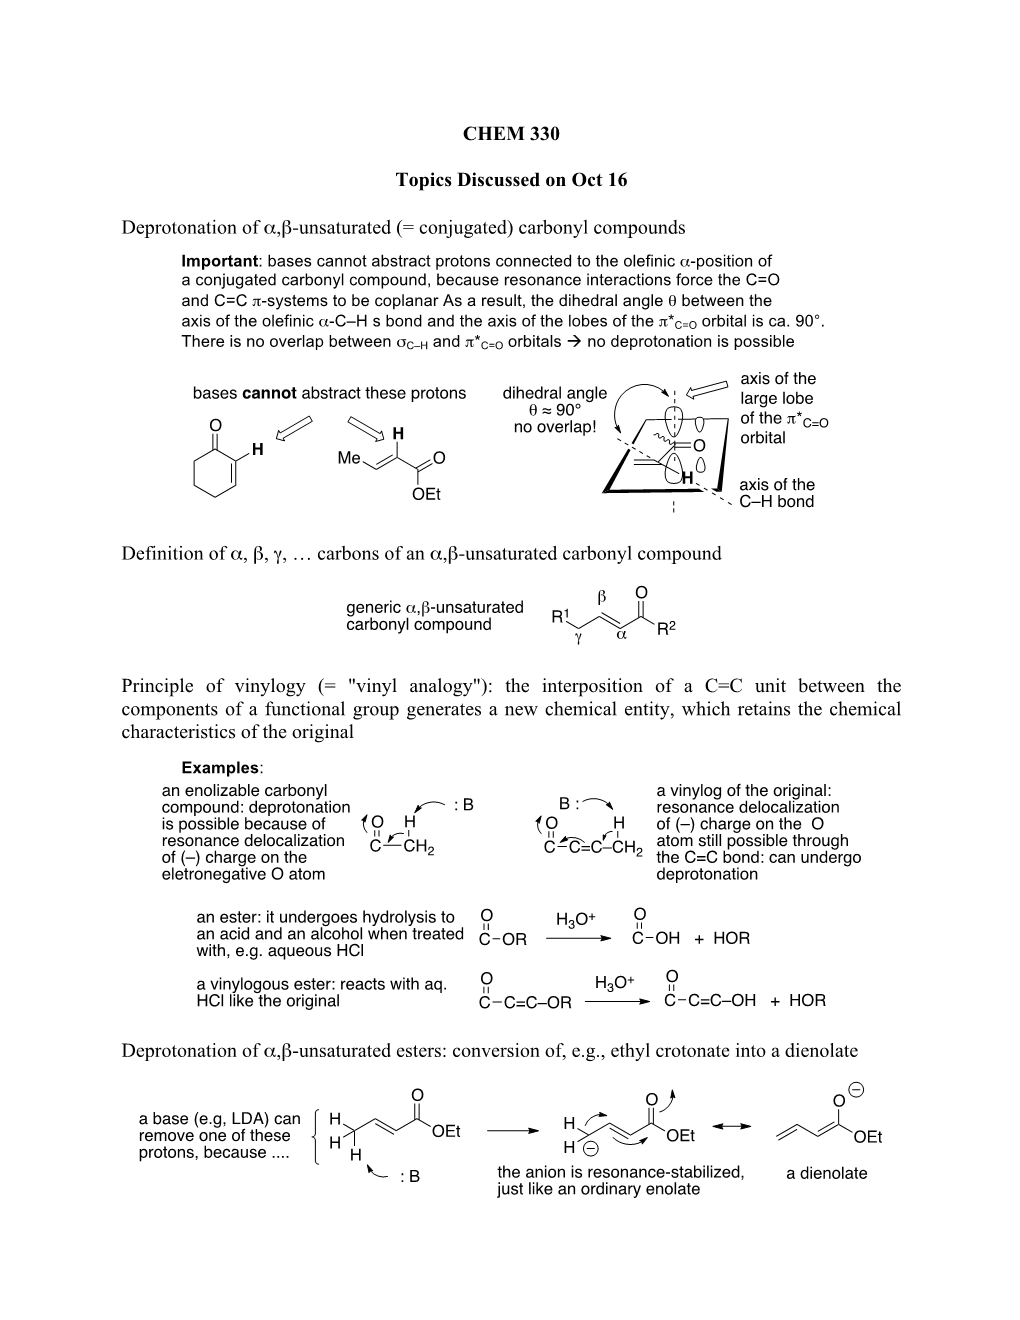 CHEM 330 Topics Discussed on Oct 16 Deprotonation of Α,Β-Unsaturated